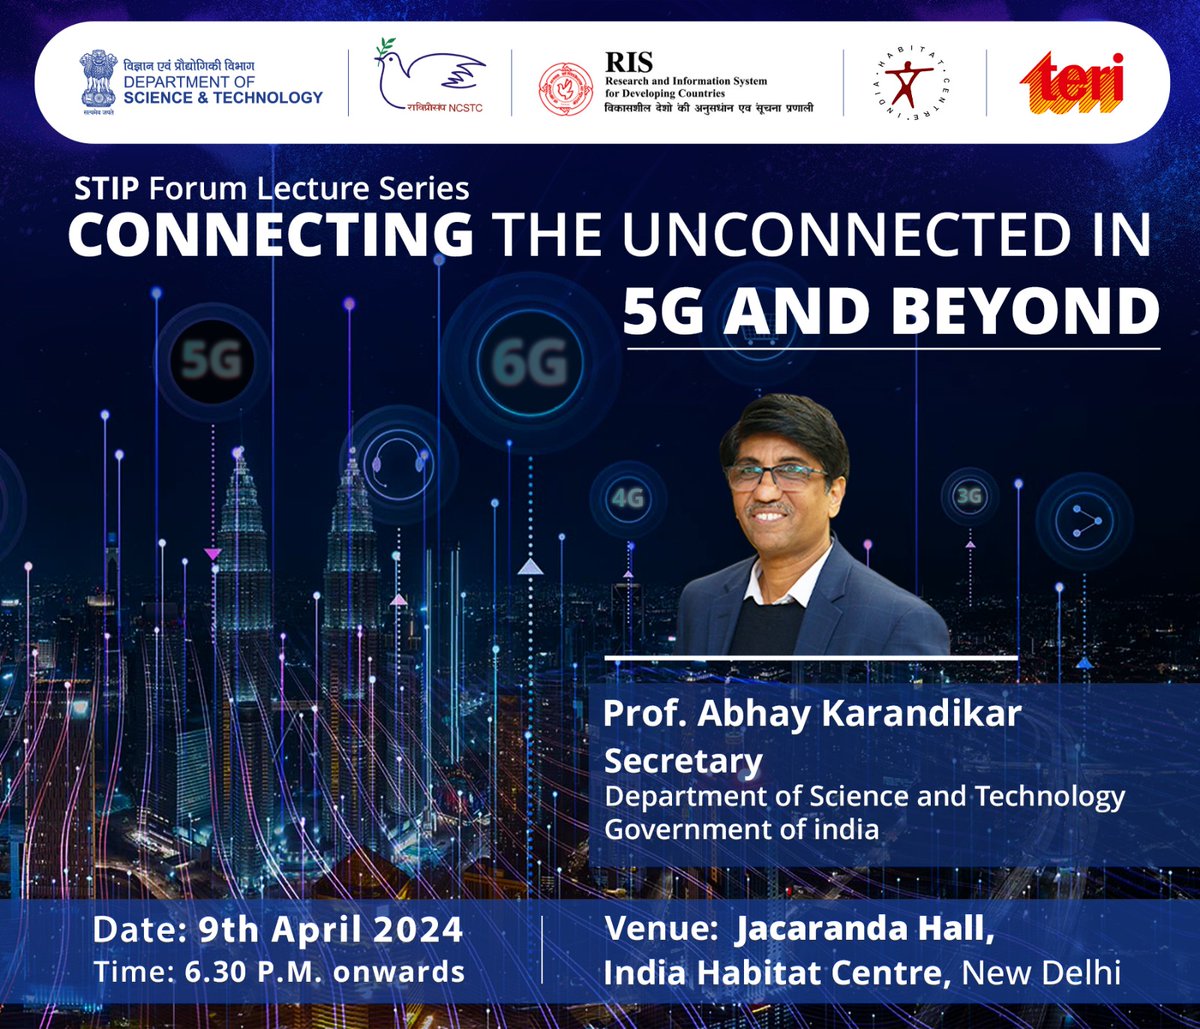 52nd STIP Forum lecture by Prof. Abhay Karandikar @IndiaDST on 'Connecting the Unconnected in 5G and Beyond' on 9th April 2024, 6:30 pm onwards at India Habitat Centre, New Delhi.